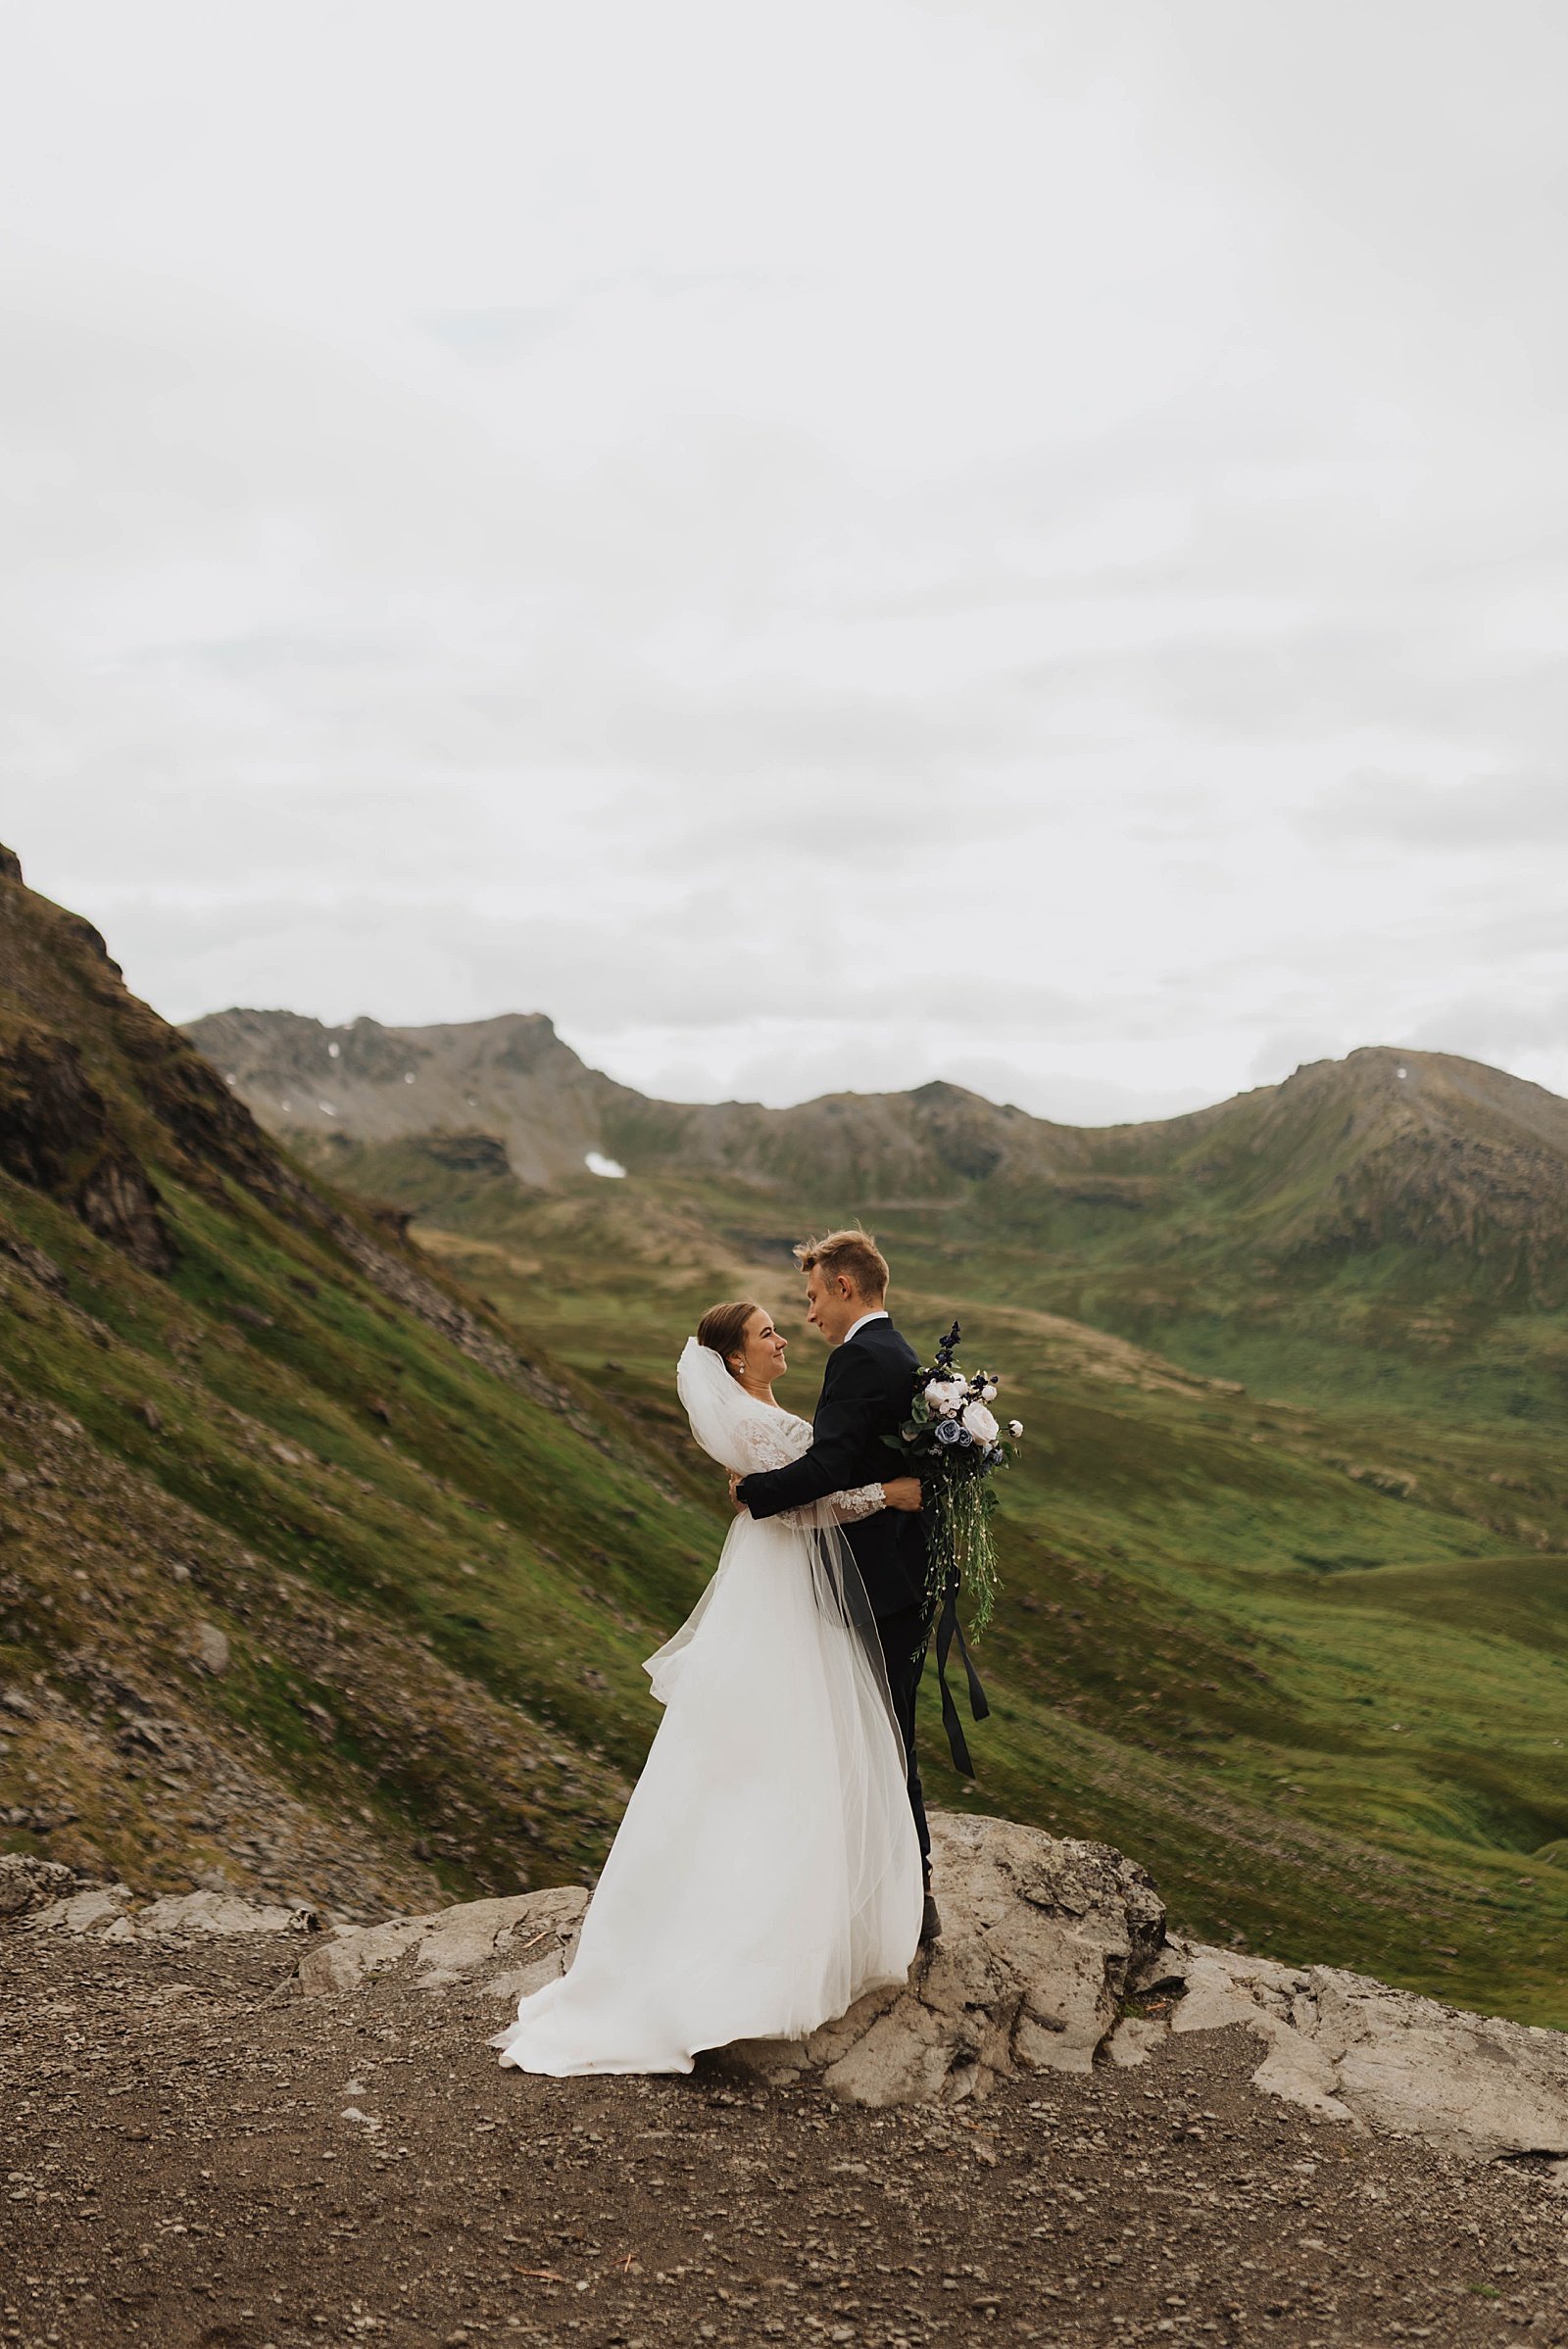  Bride and groom embrace on a mountaintop in Alaska  